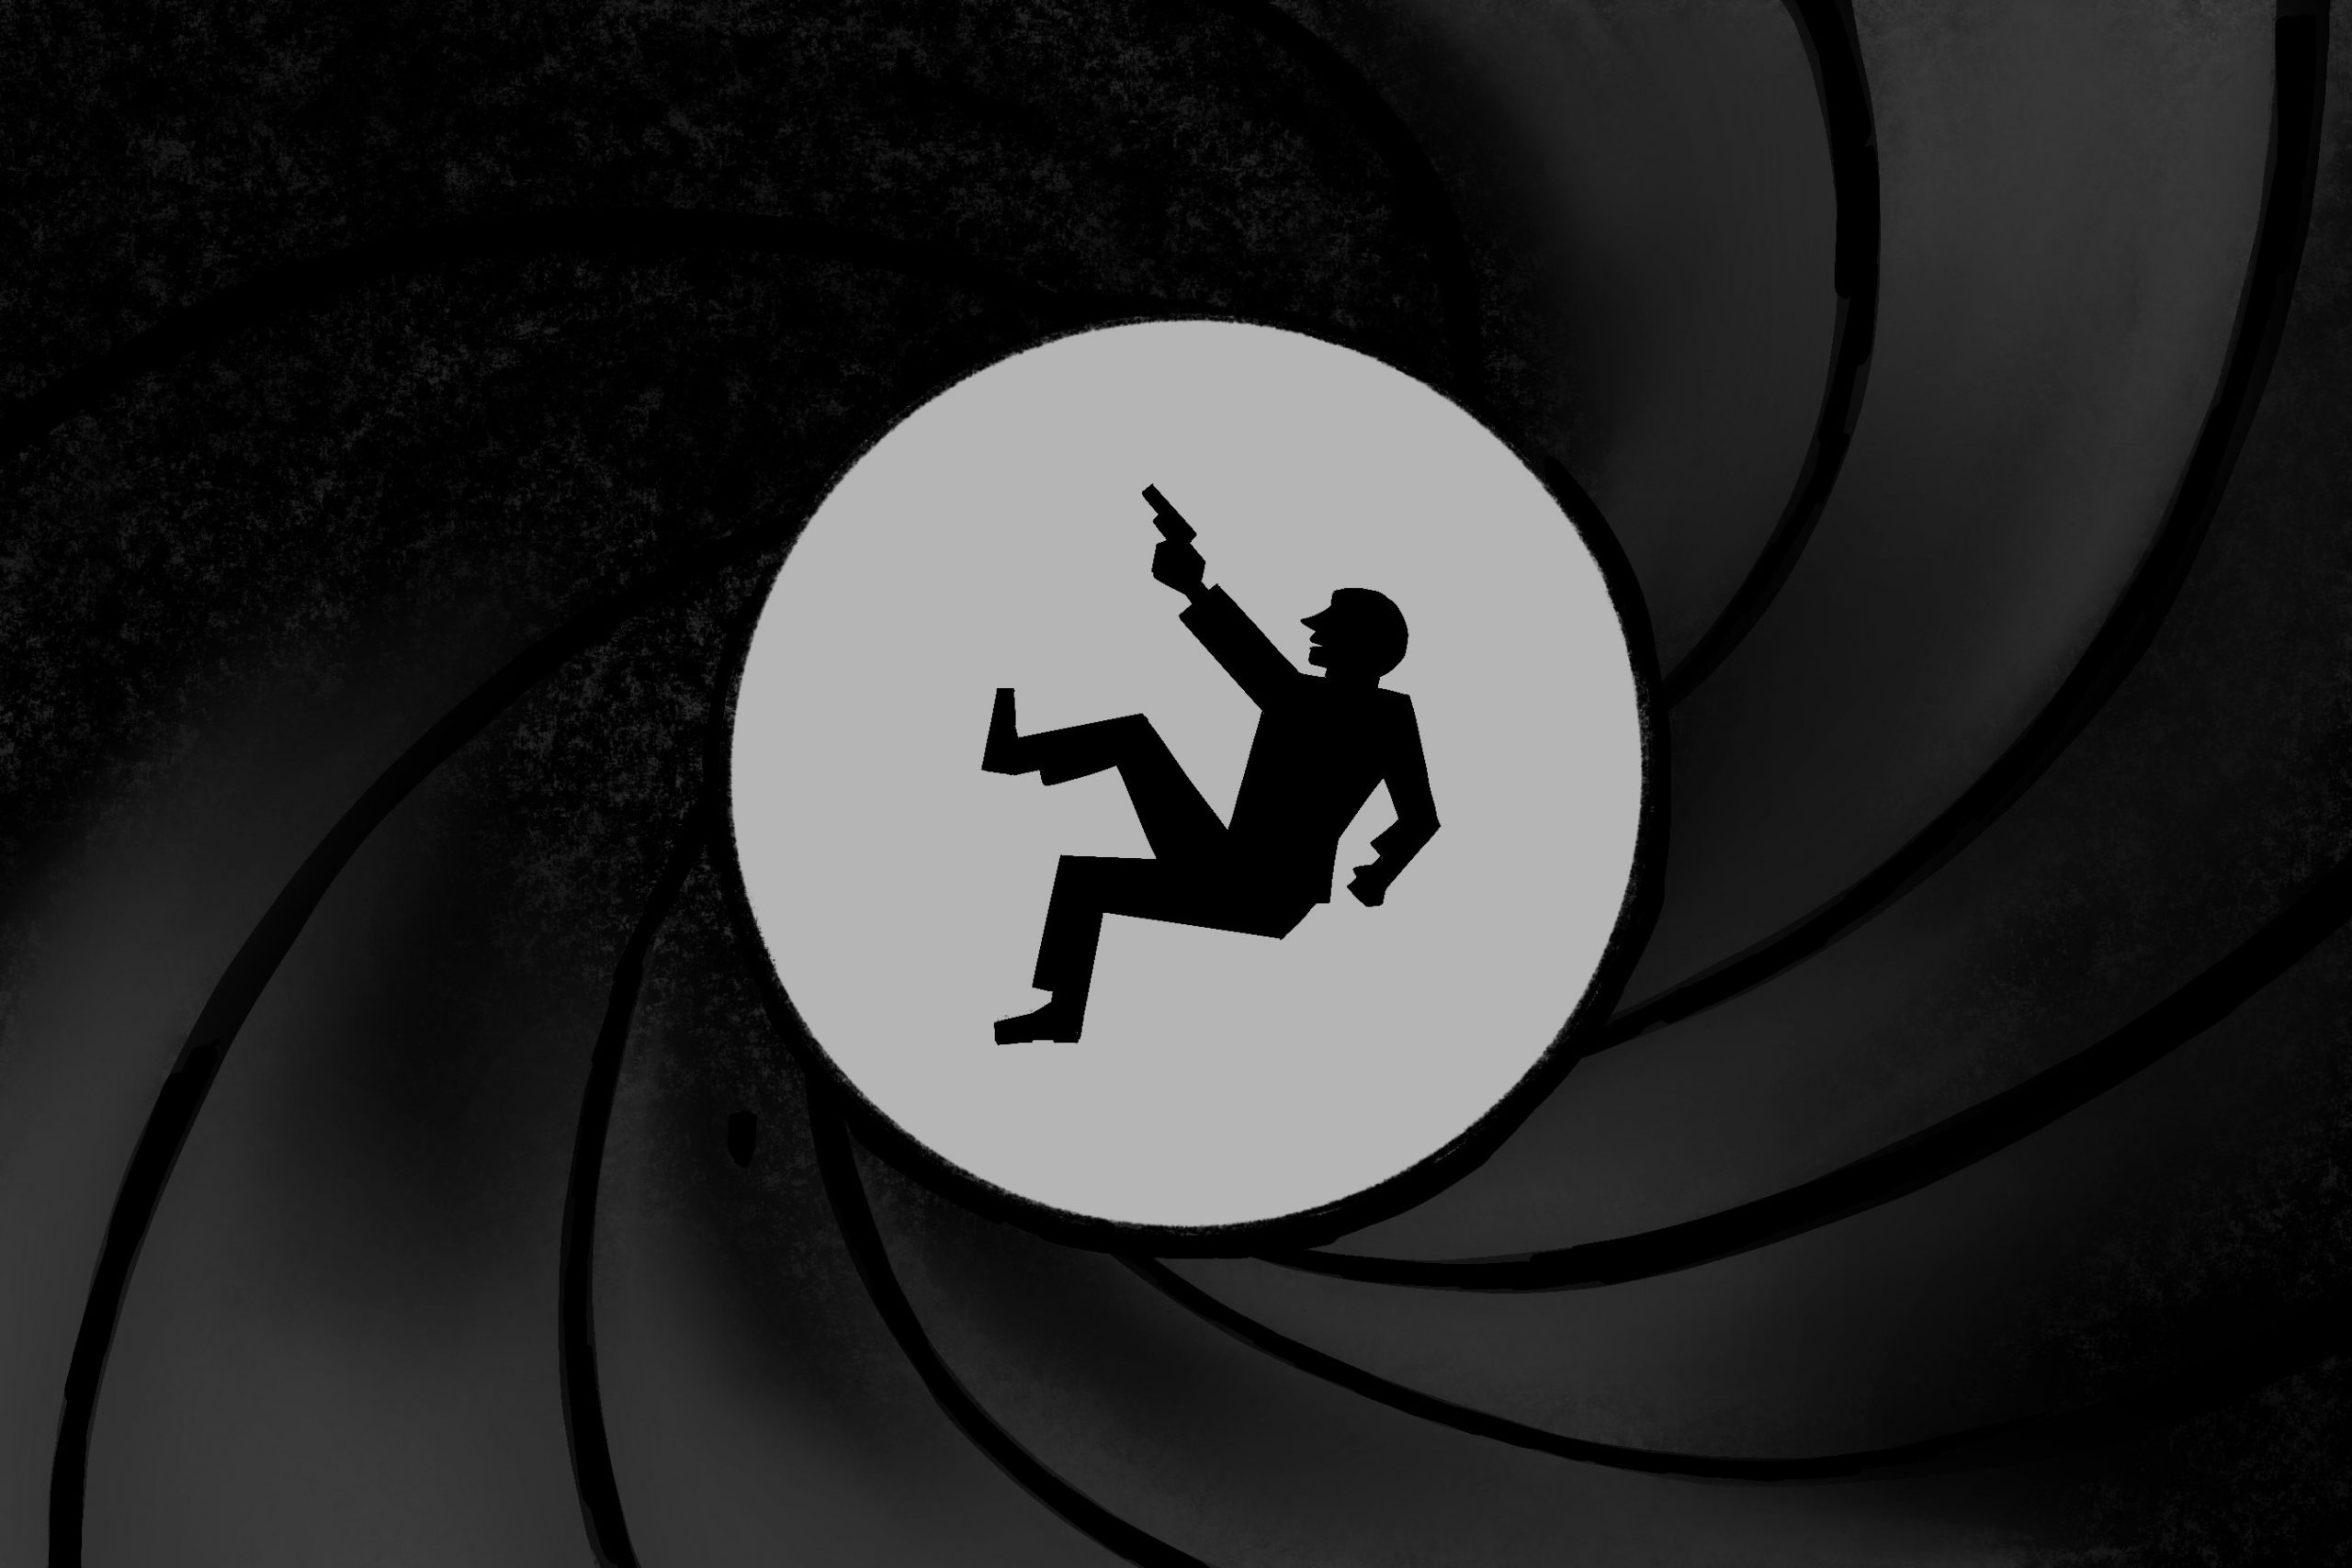 In article about No Time To Die, James Bond falls while holding a gun